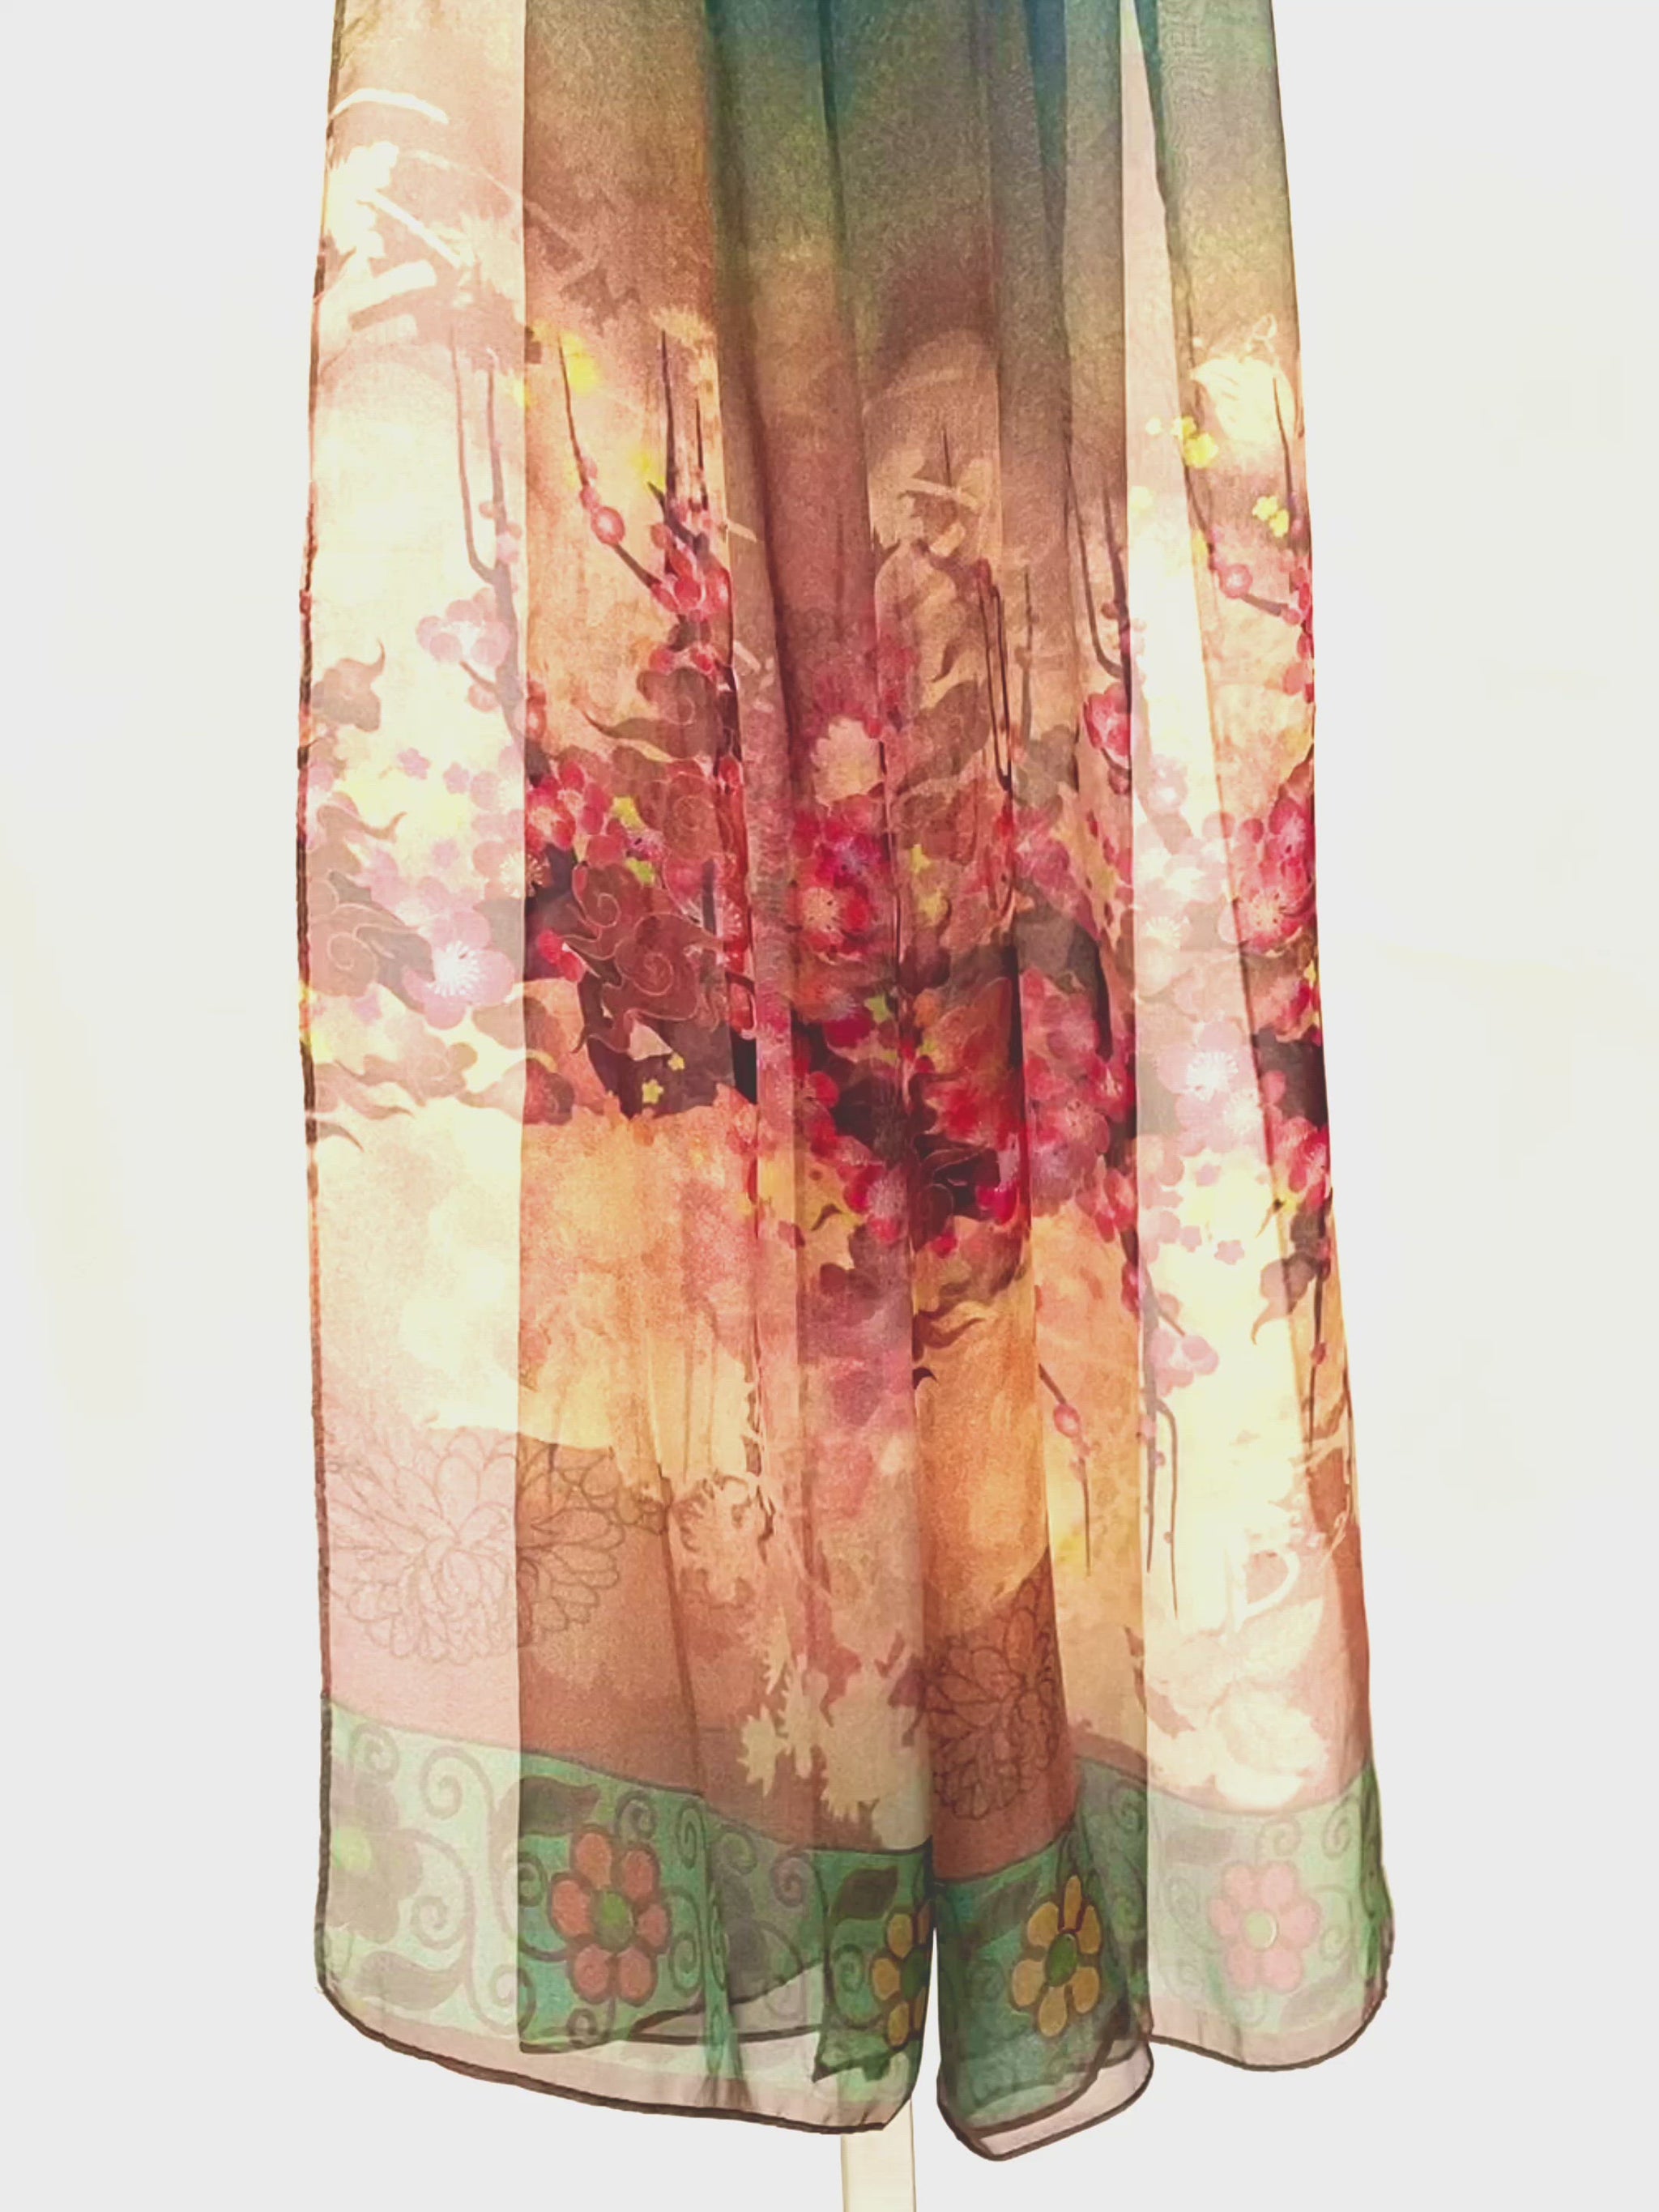 Tree Branch silk scarf moving in a suble breeze. Very light and sheer. Reds and green tones.